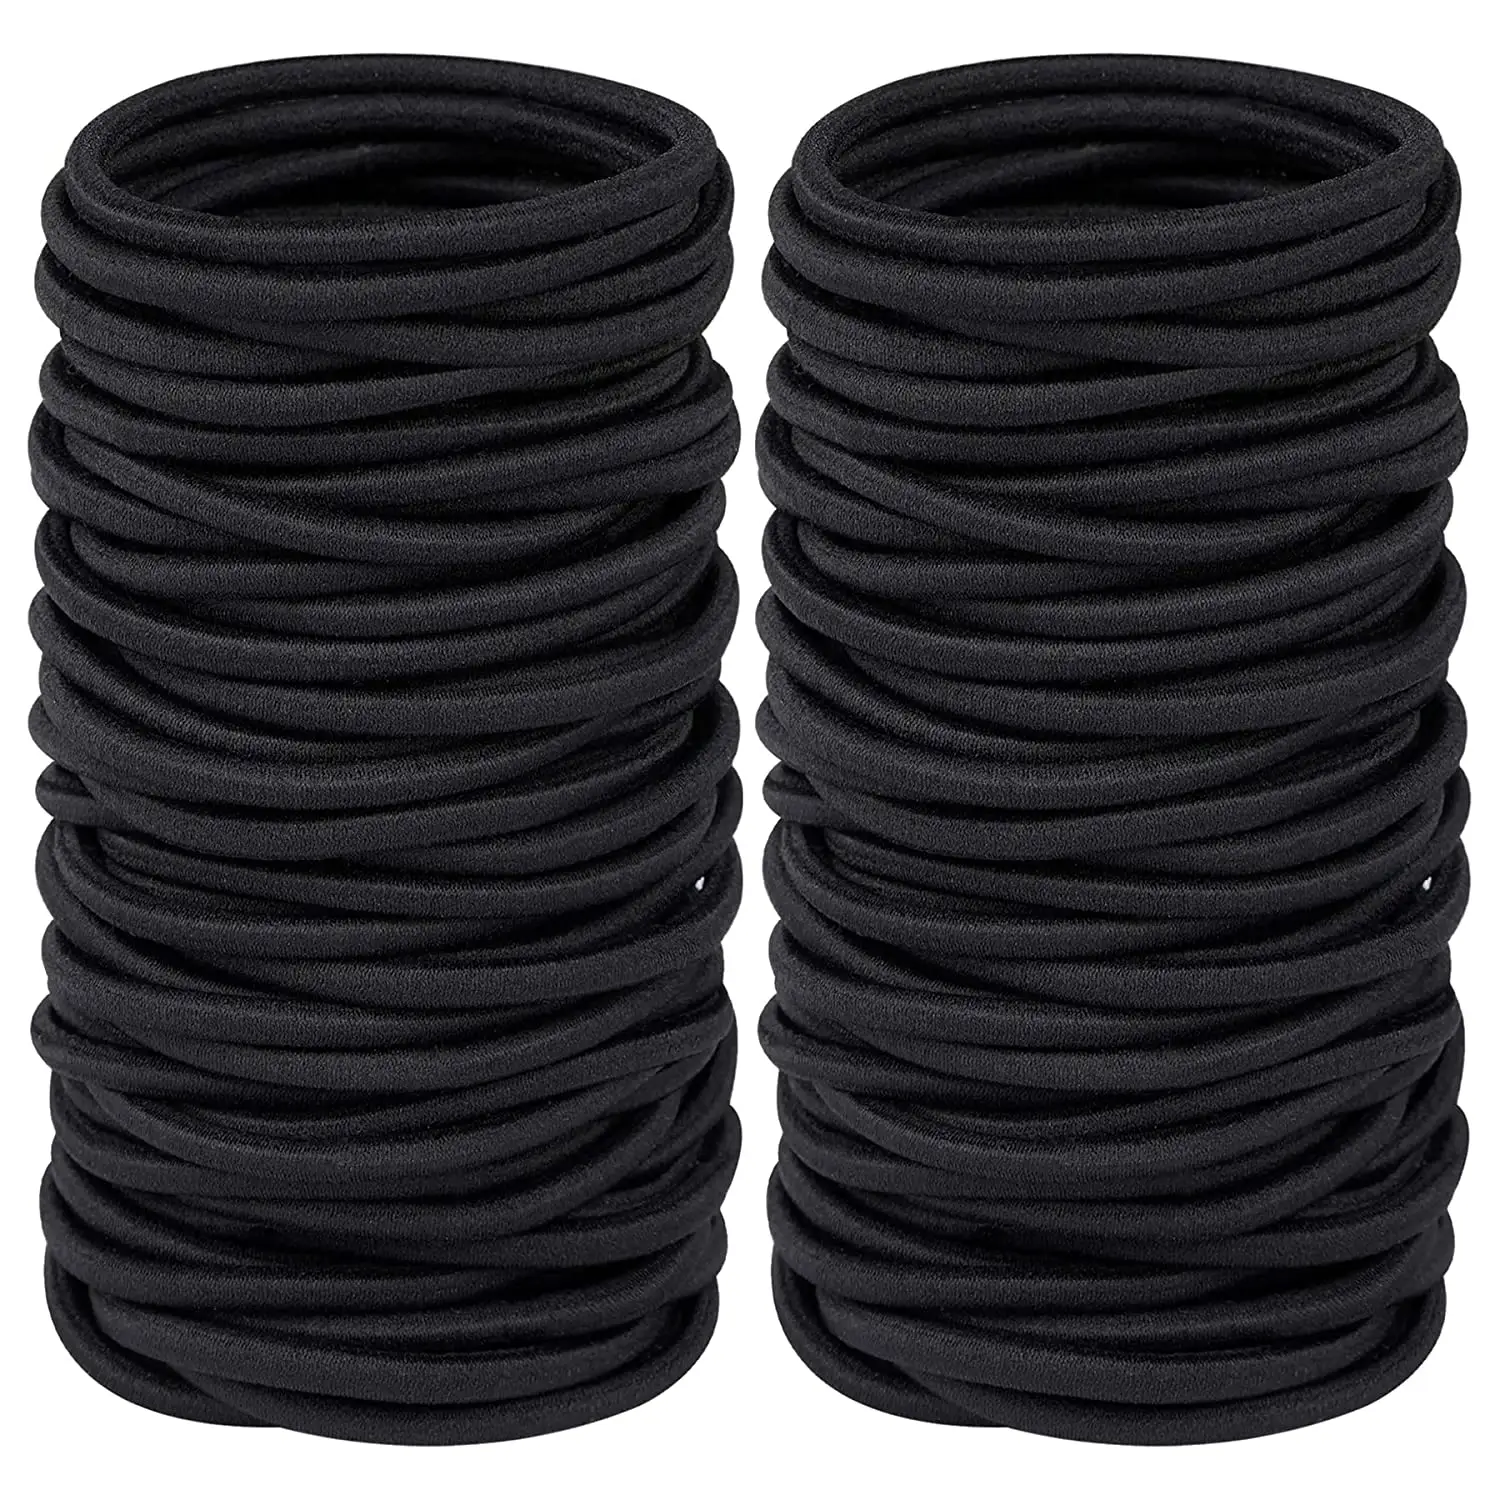 Wholesale Top Quality Black Elastic Hair Bands Ties For for women kids 4mm/3mm/2mm